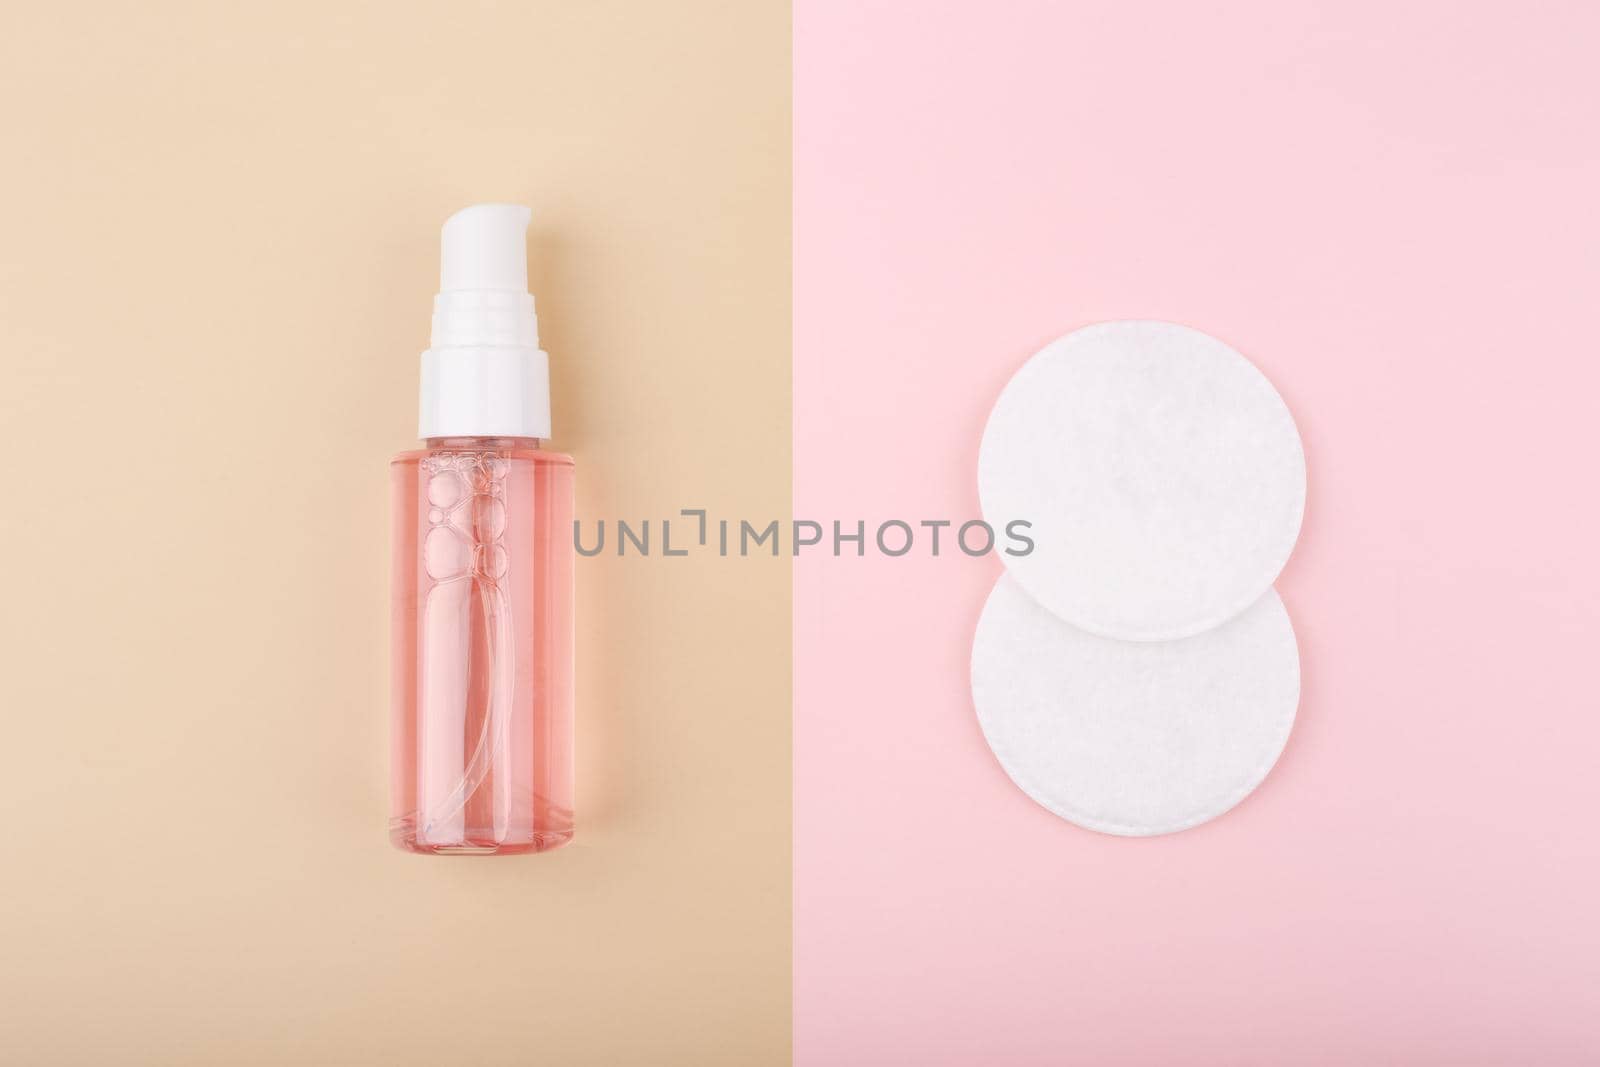 Top view of cleansing foam or gel for make up removing and cotton pads on beige and pink background. Concept of daily skin care